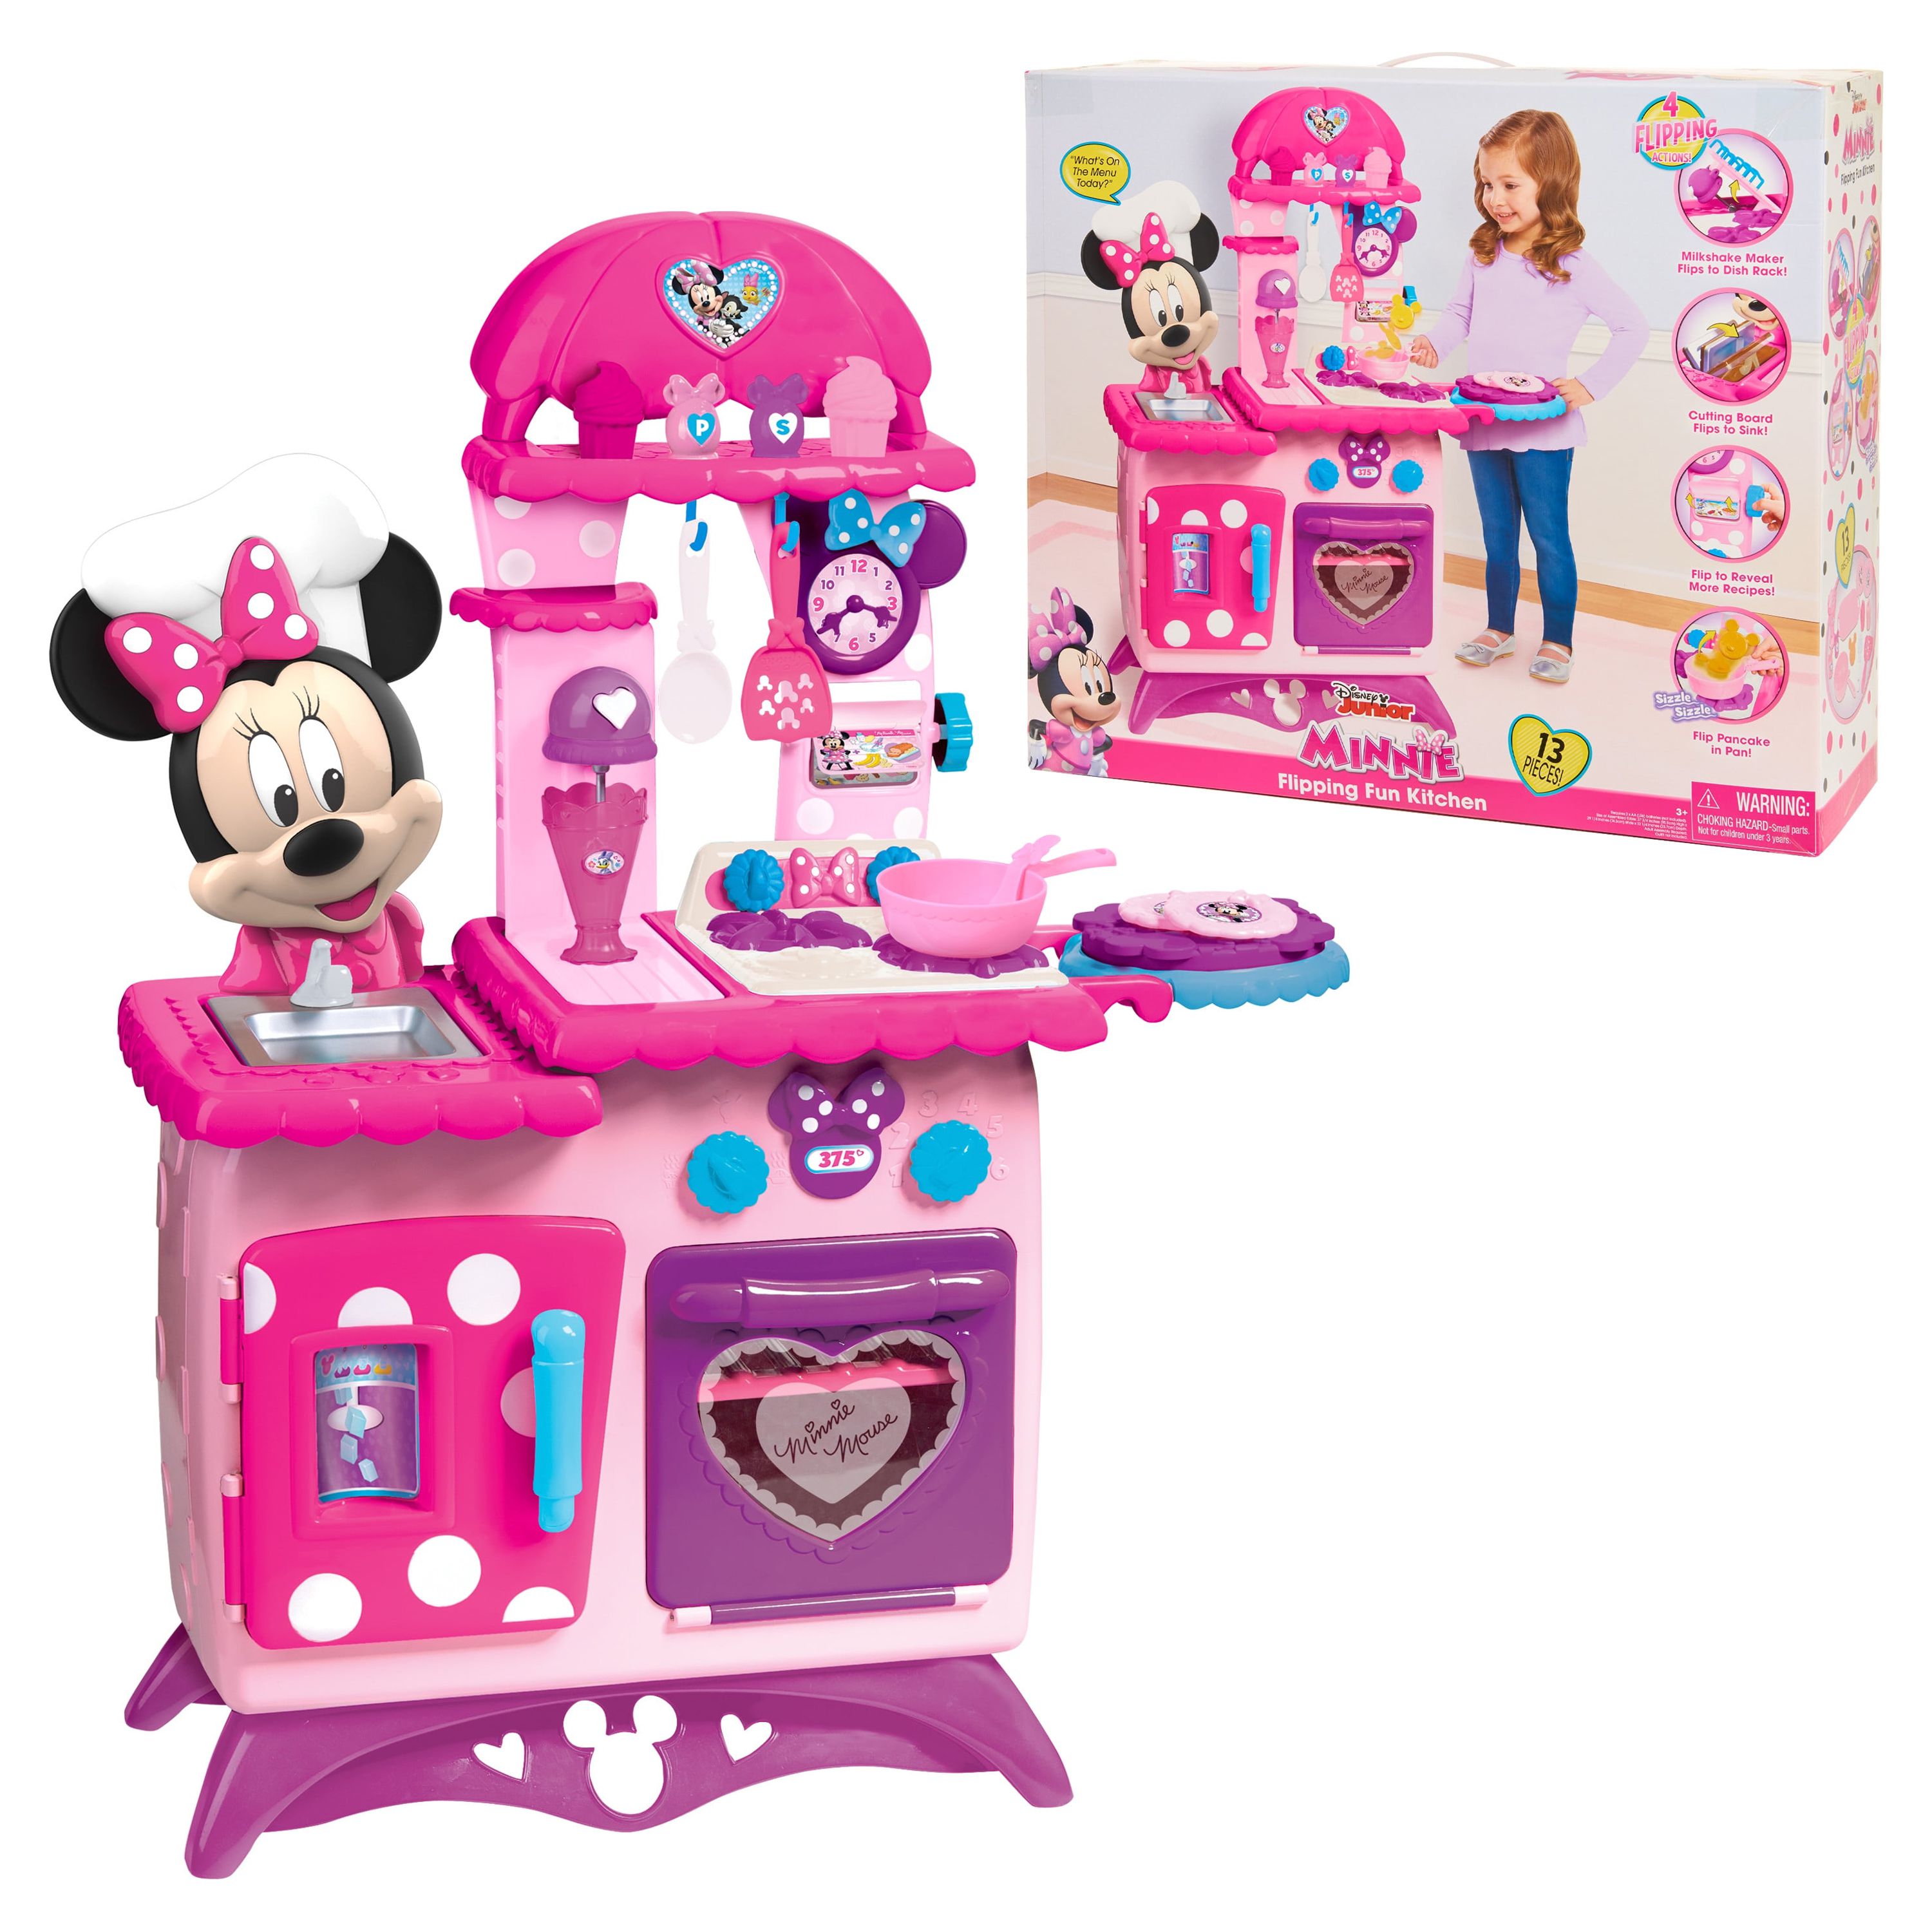 Disney Junior Minnie Mouse Flipping Fun Pretend Play Kitchen Set, Play Food, Realistic Sounds, Kids Toys for Ages 3 up - image 1 of 3